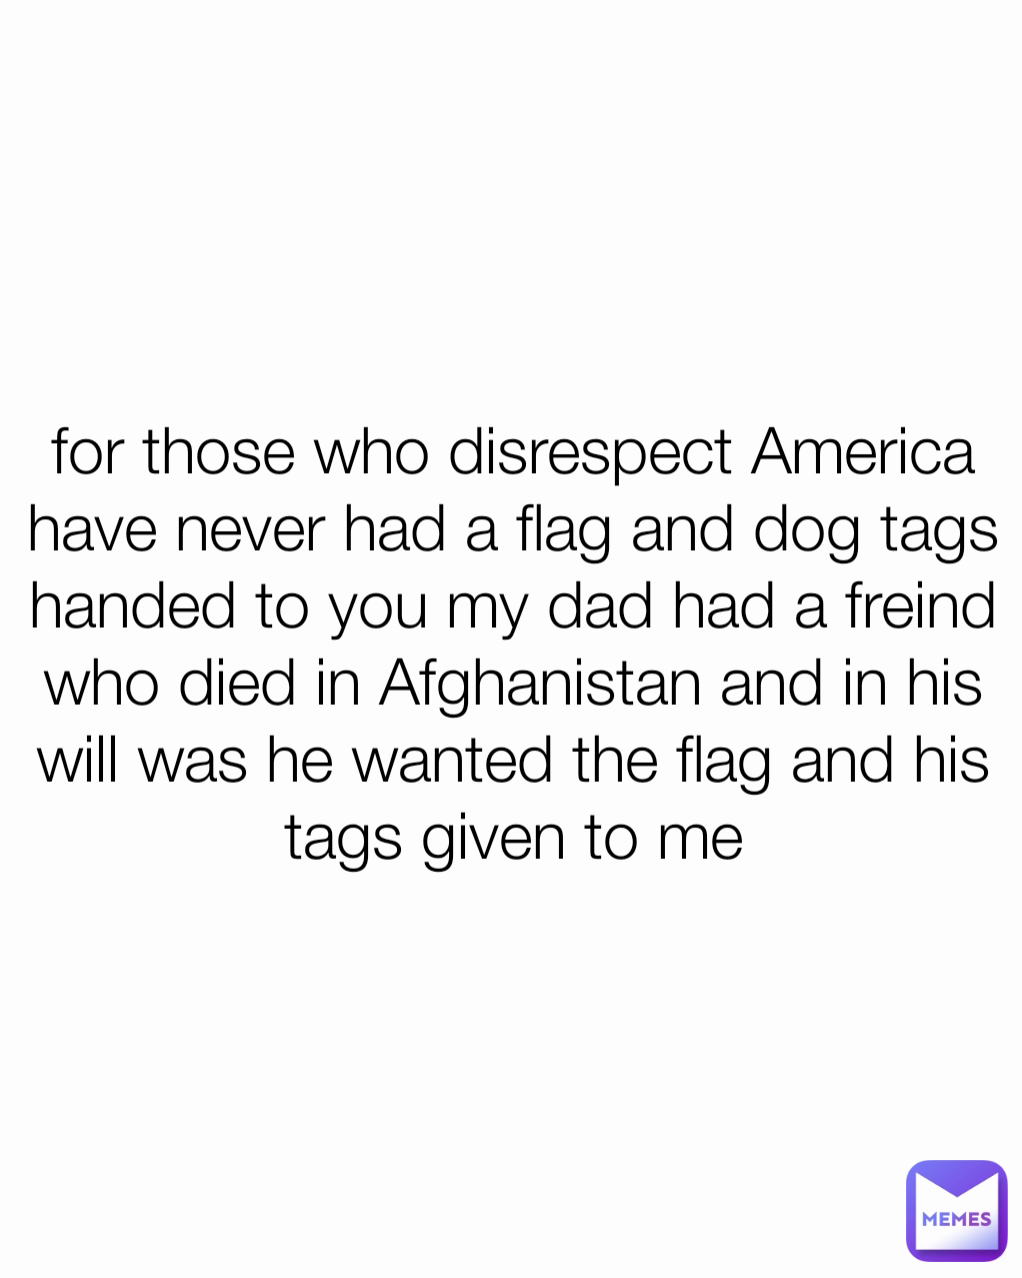 for those who disrespect America have never had a flag and dog tags handed to you my dad had a freind who died in Afghanistan and in his will was he wanted the flag and his tags given to me